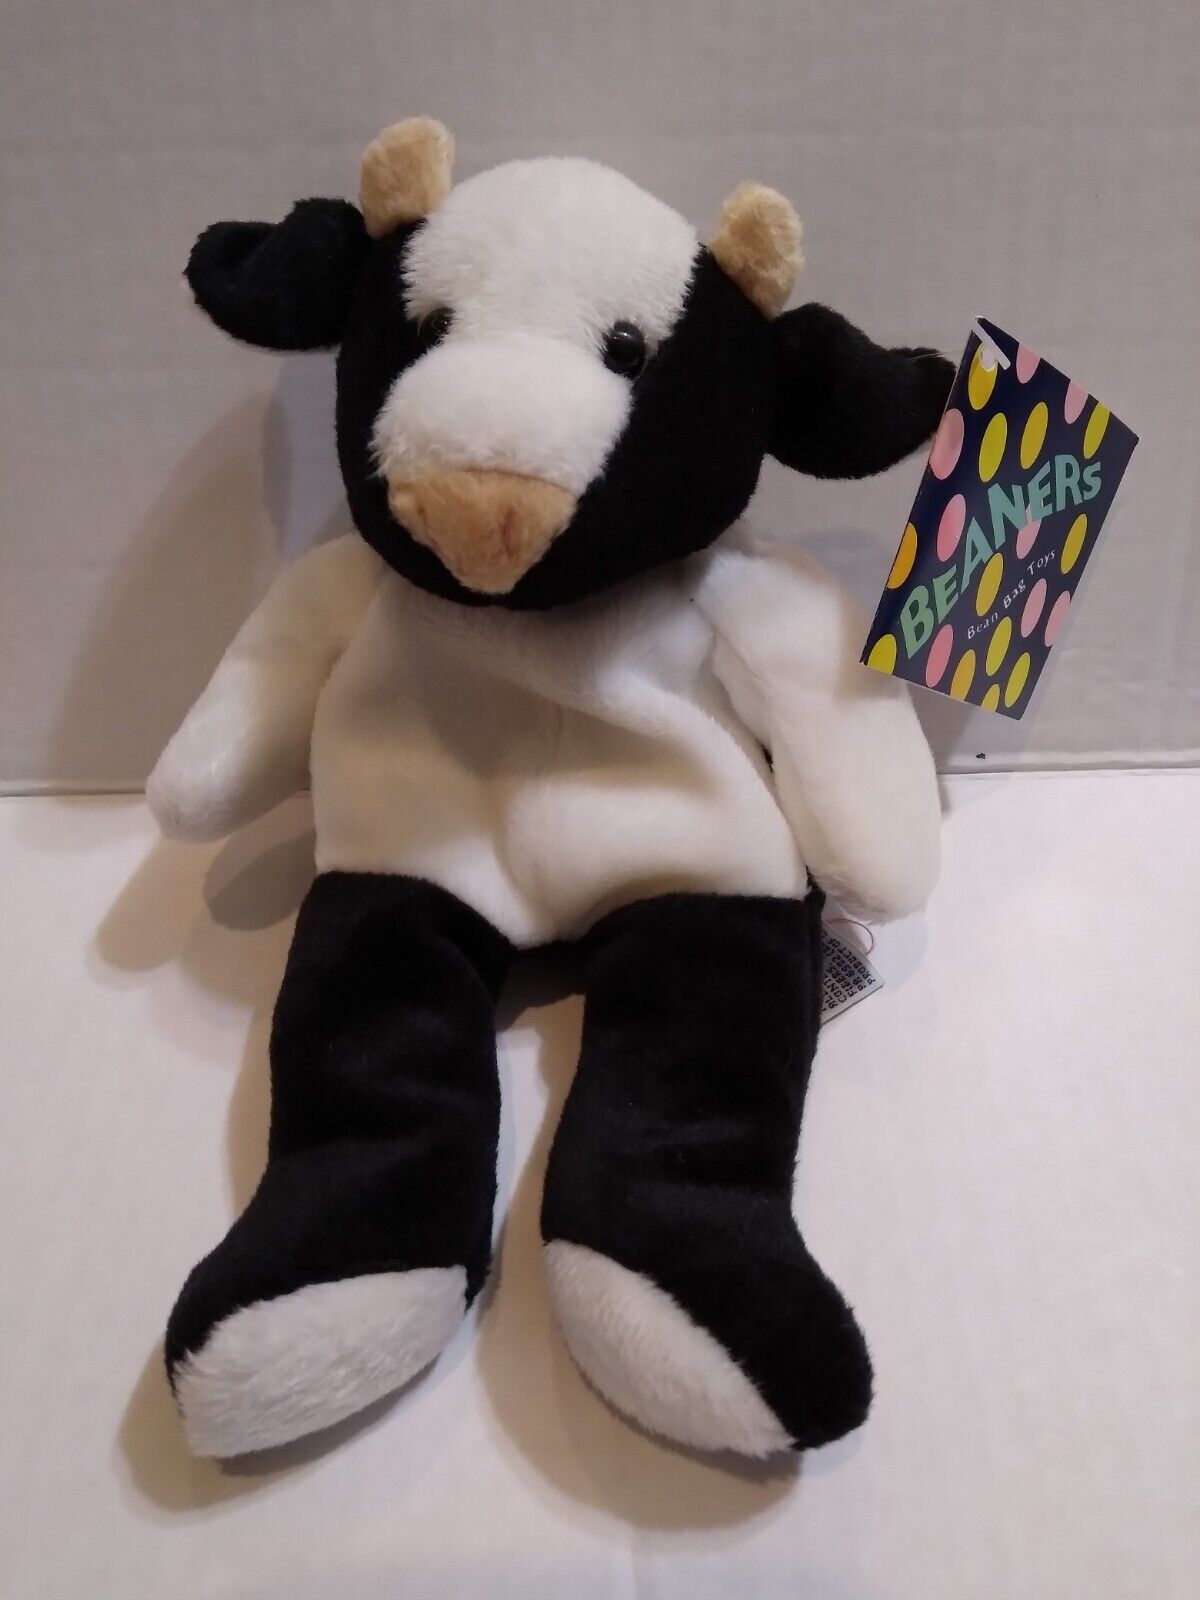 Sherbet Lamb Taggies Teether Rattle Toy